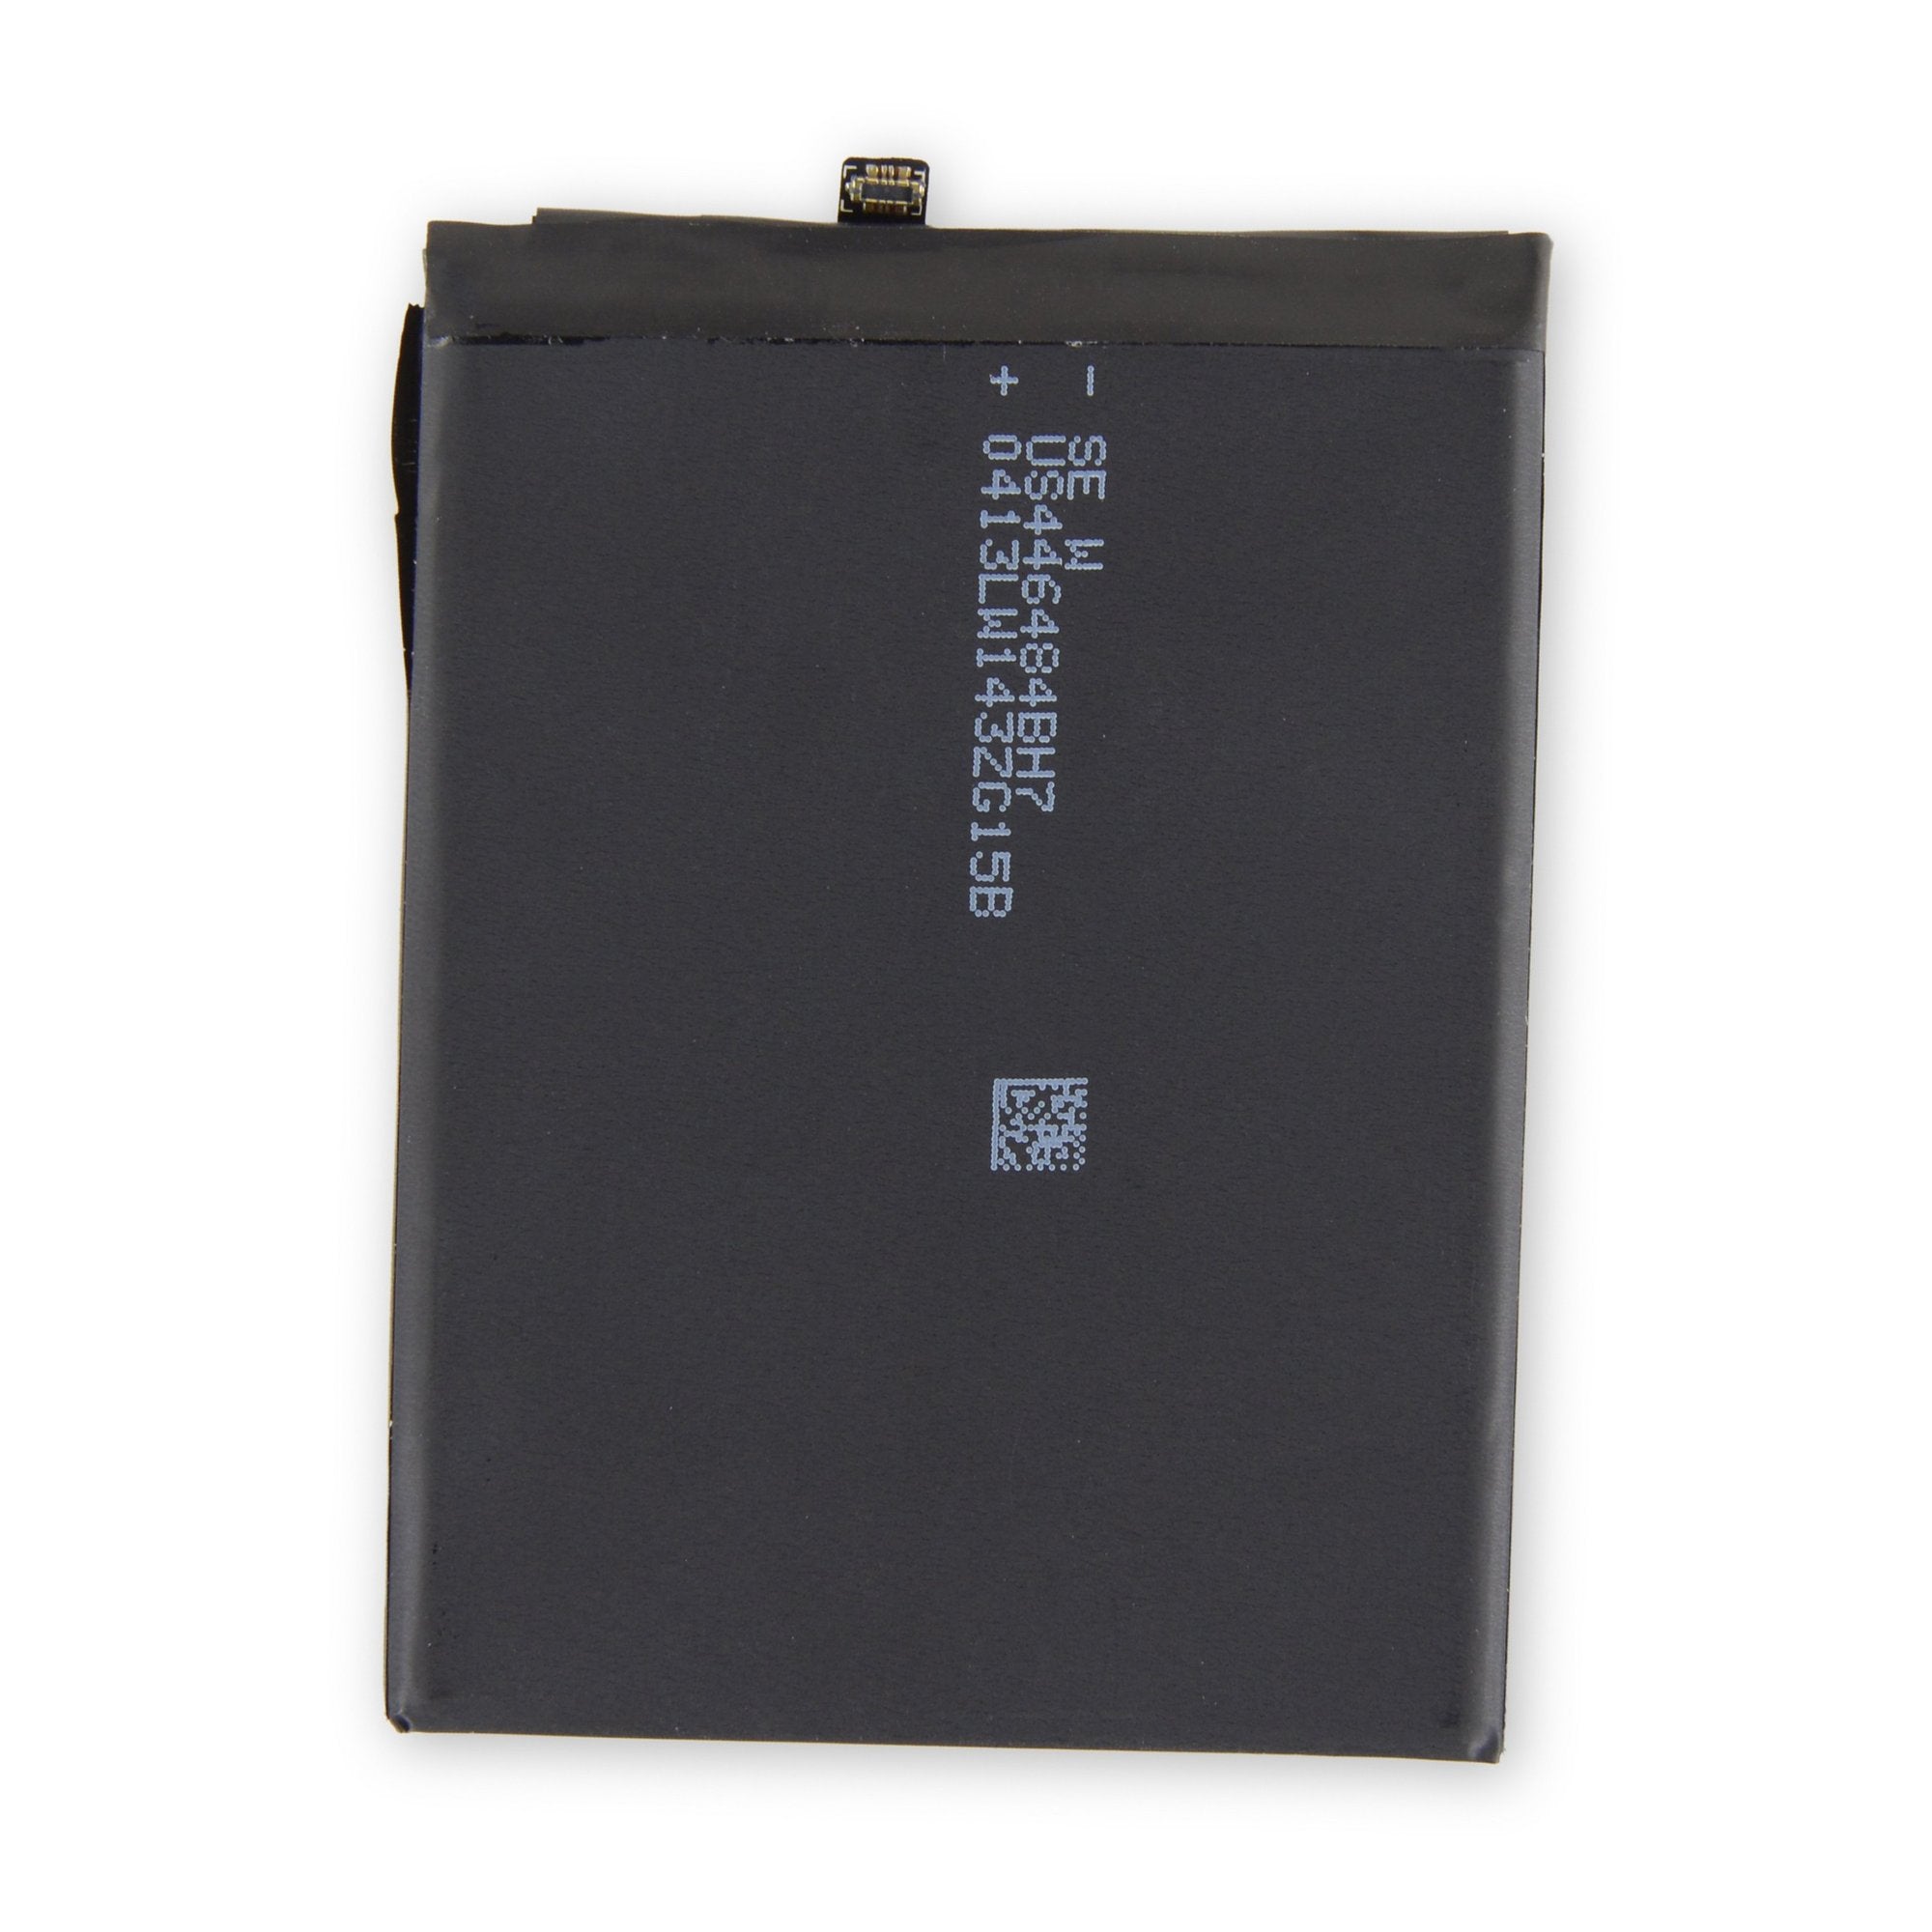 Huawei Mate 10, Mate 10 Pro, or P20 Pro Battery New Part Only